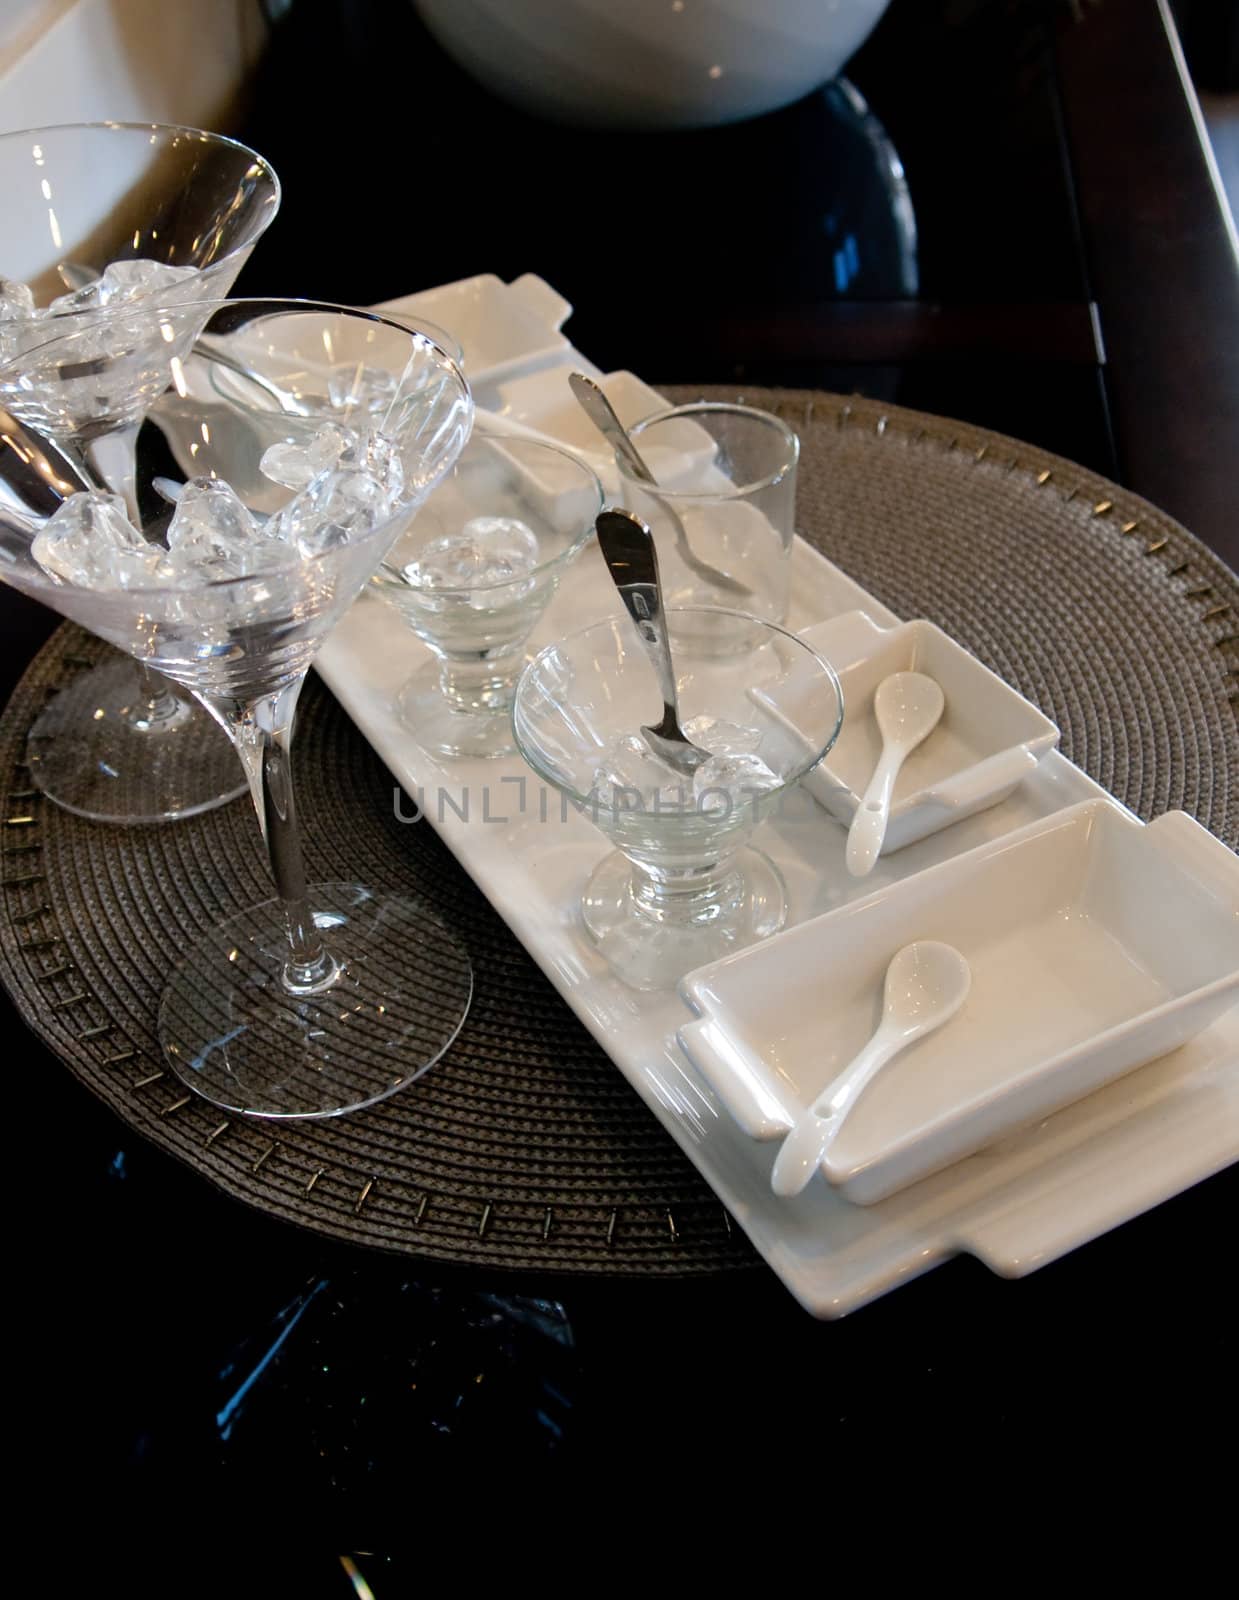 Martini service dishes on a woven place mat.